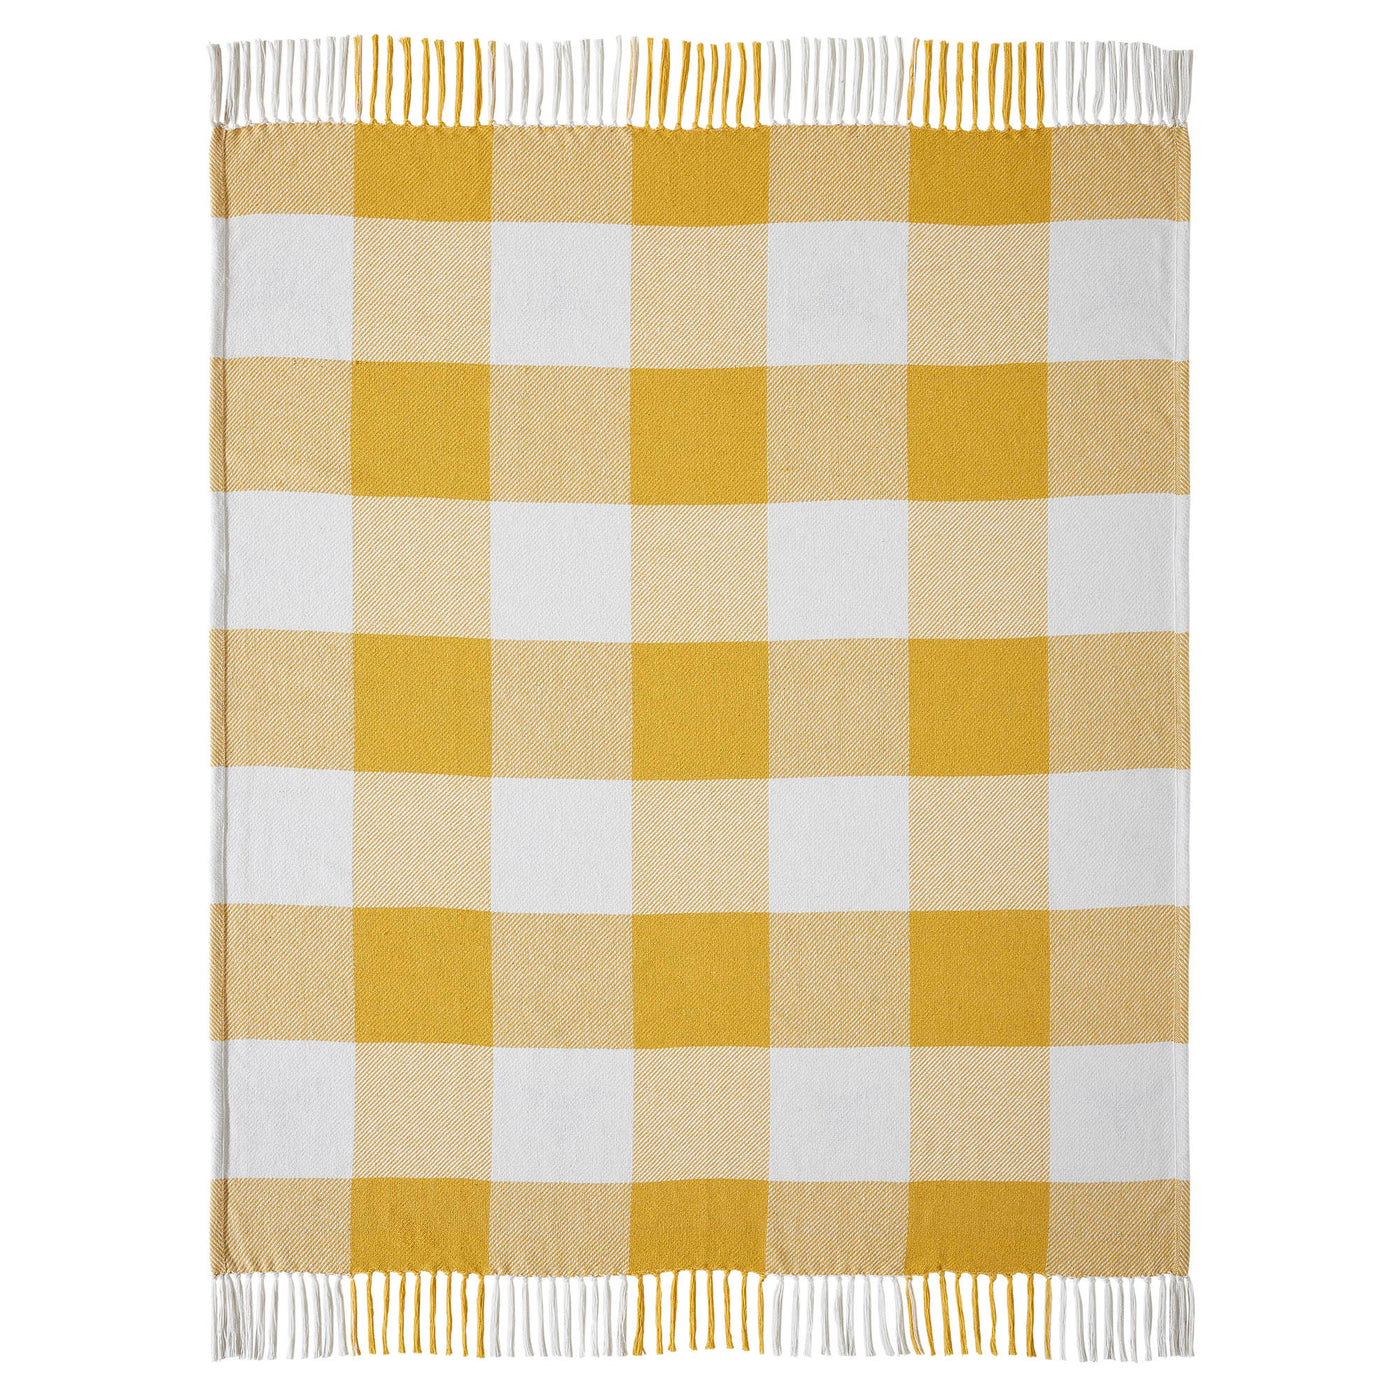 Buzzy Bees Woven Yellow and White Throw